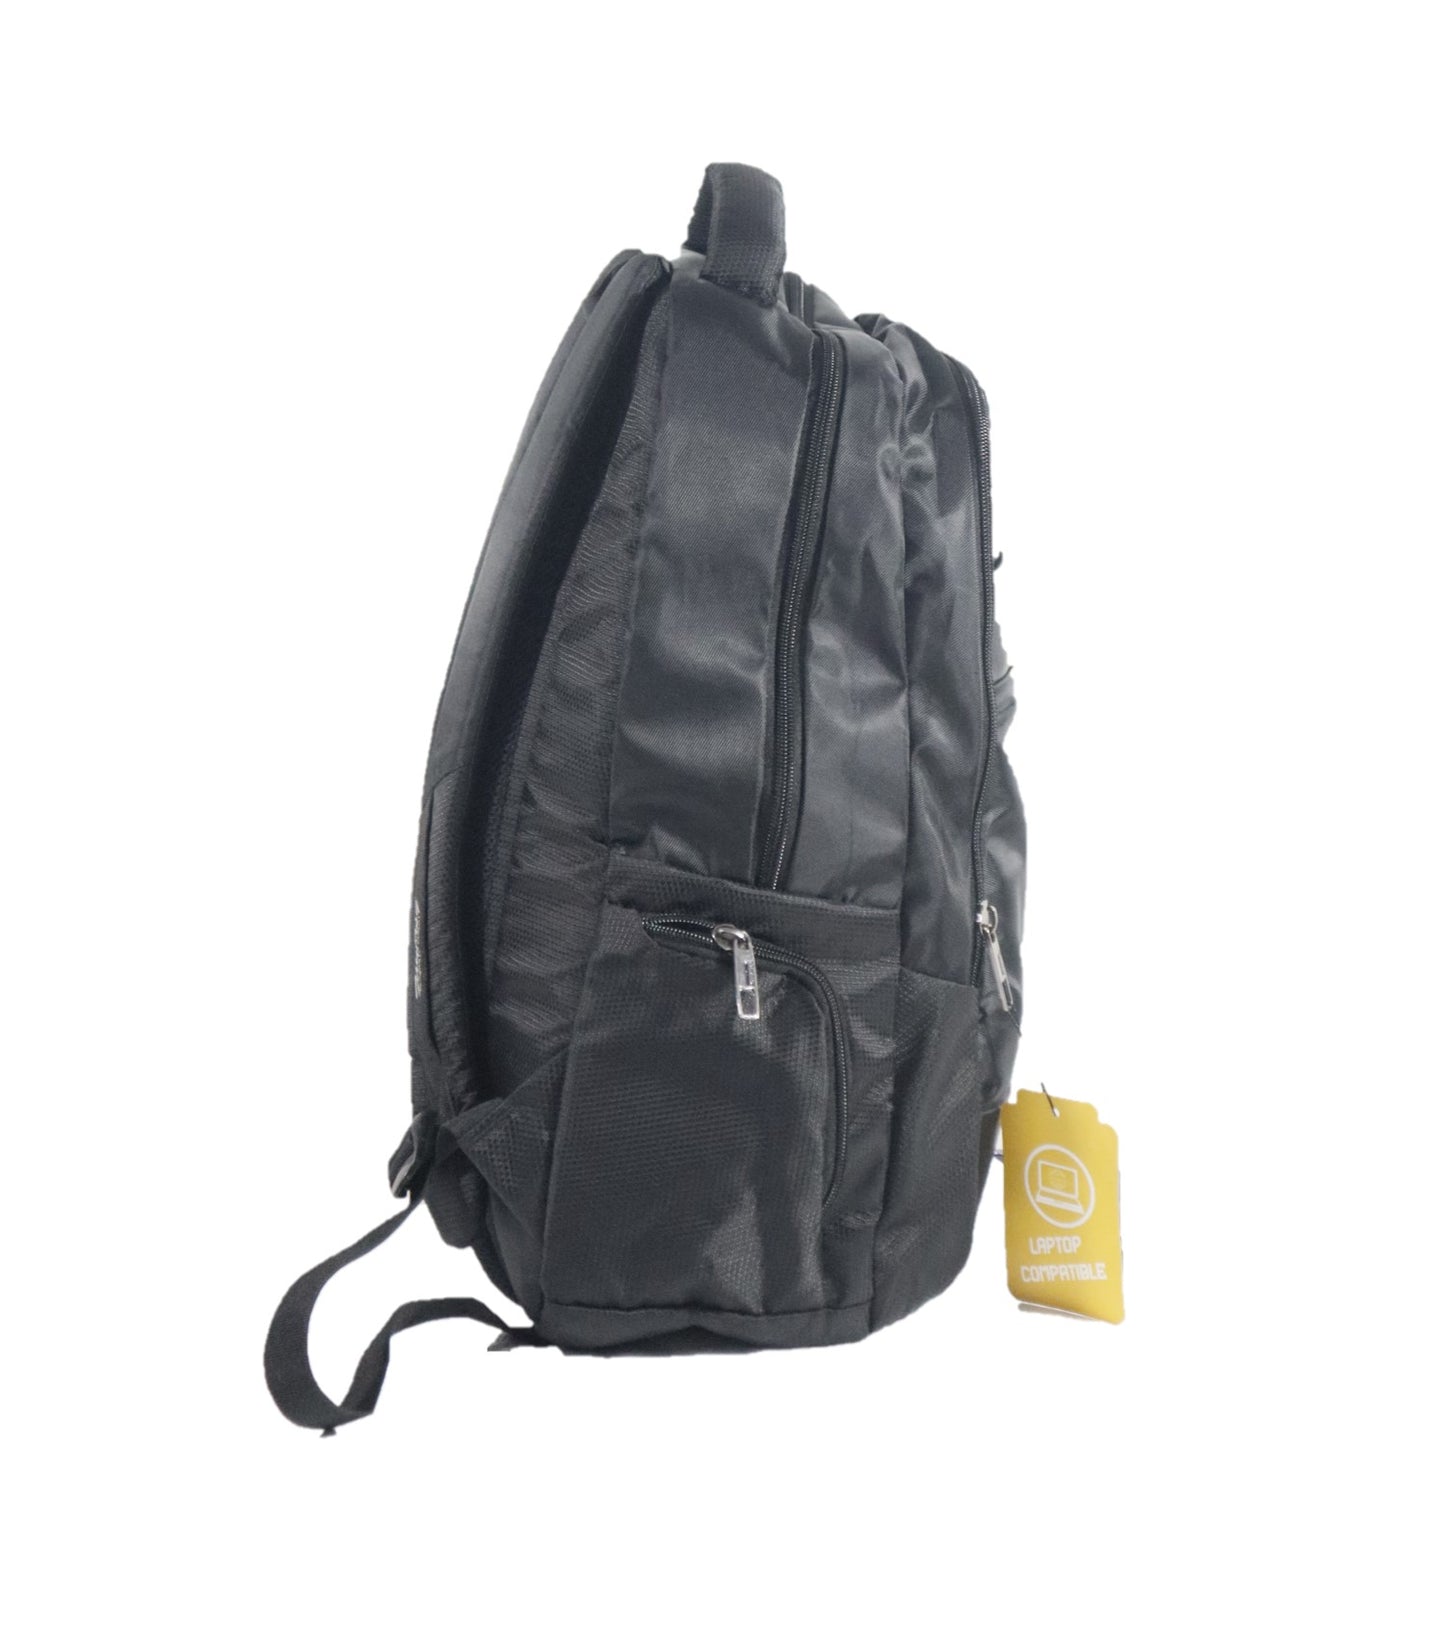 Priority stylish backpack in black color